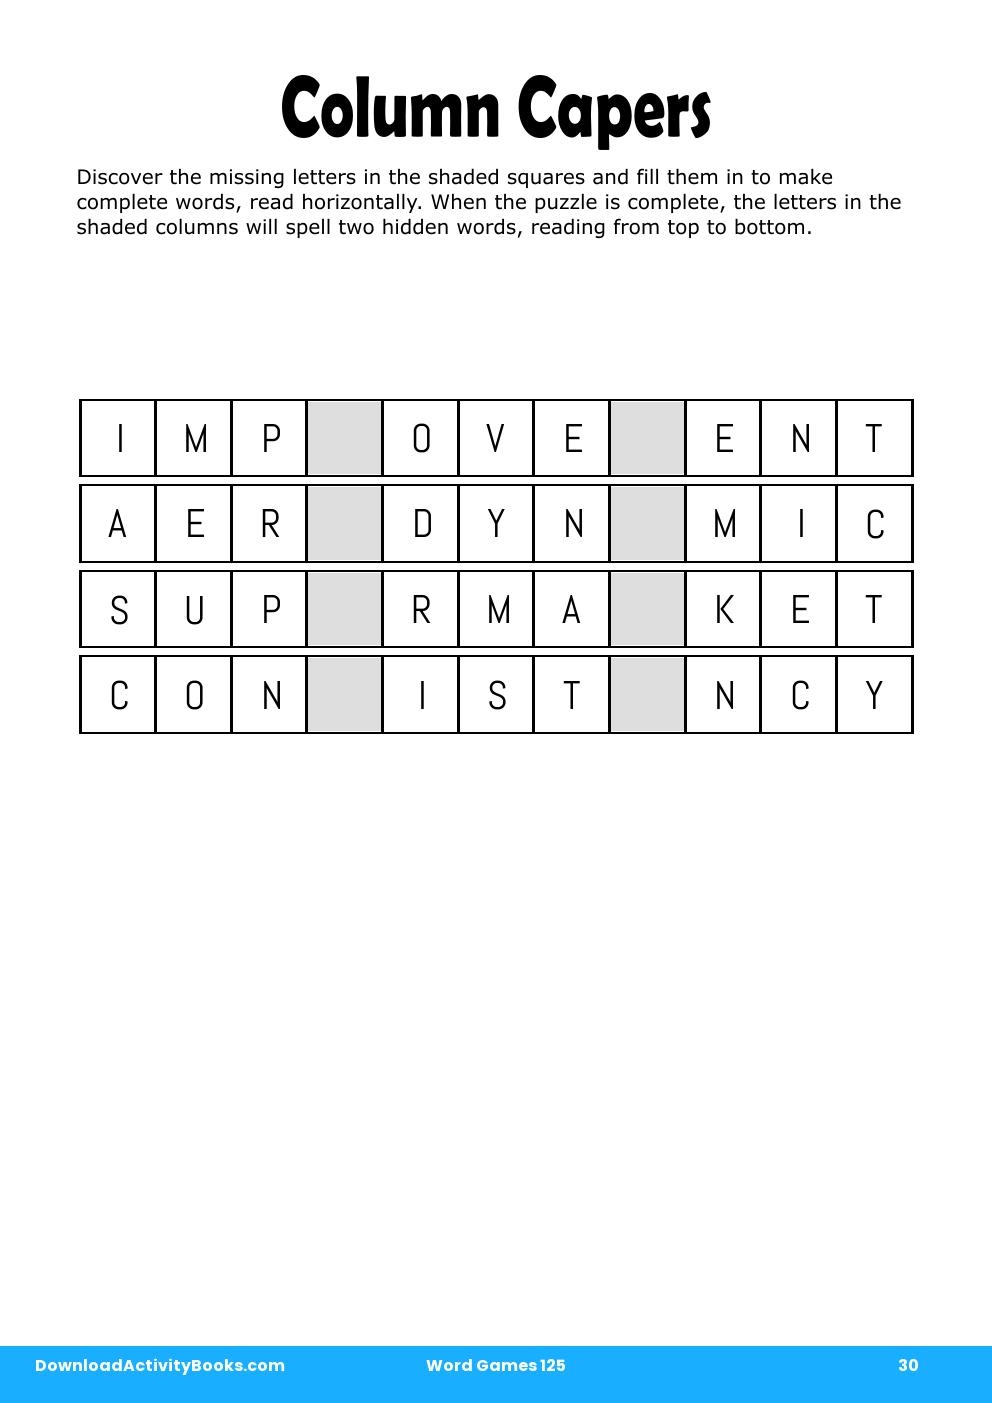 Column Capers in Word Games 125